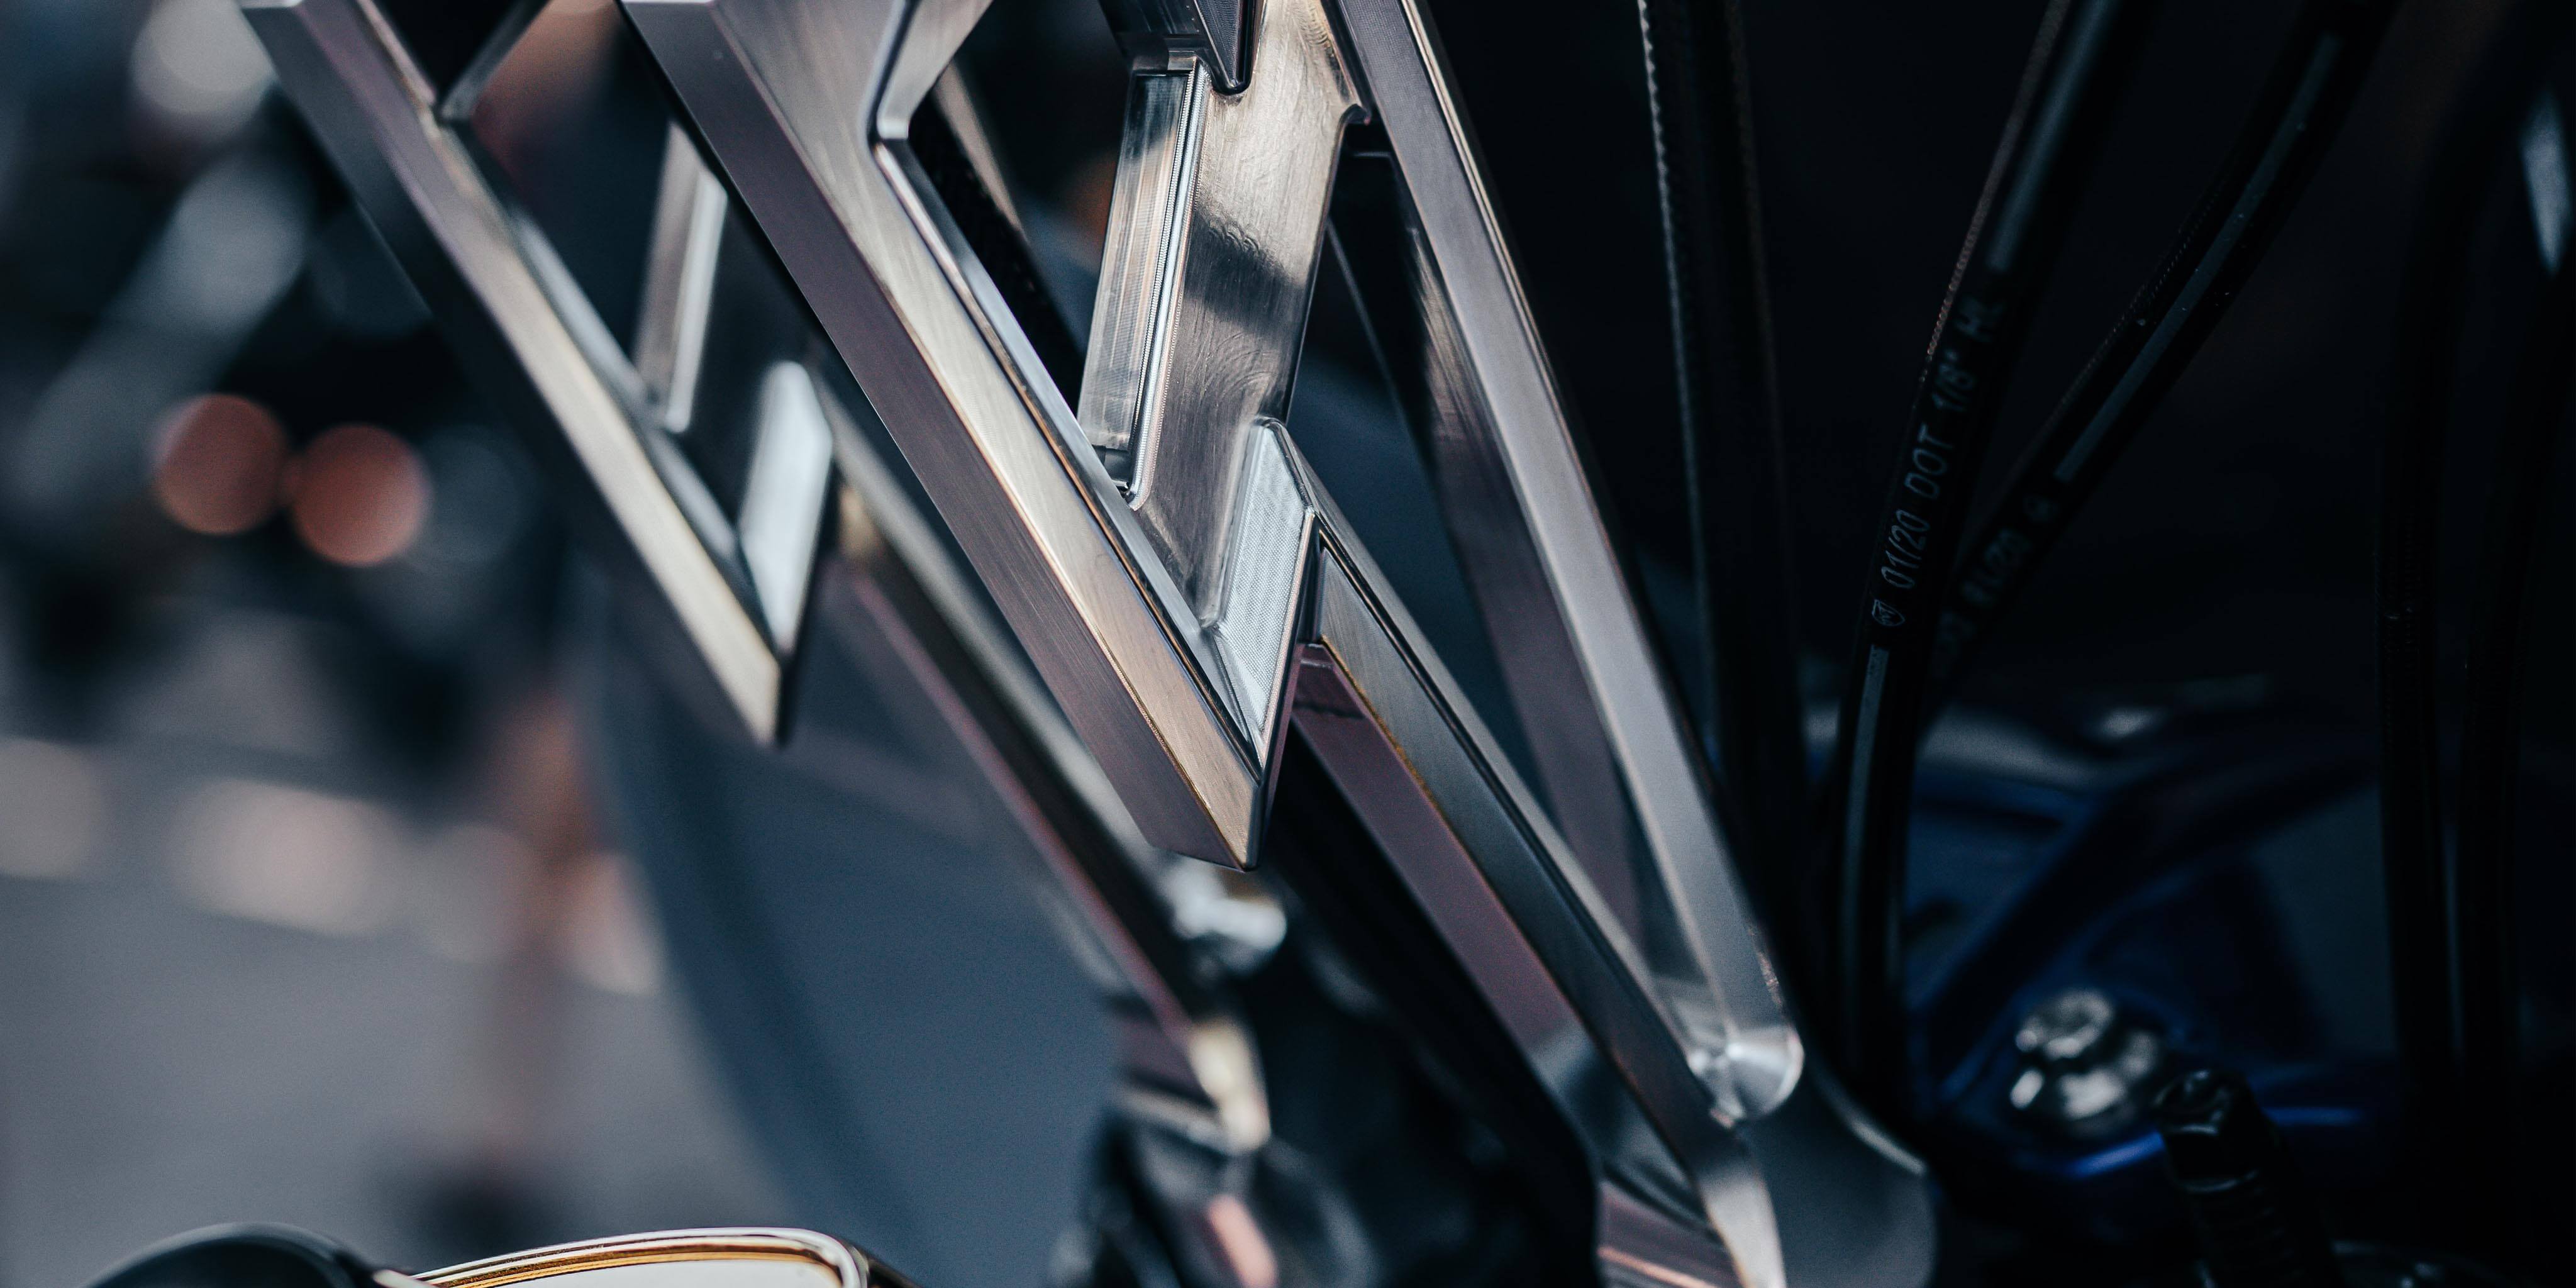 Close up shot of Lucky Speed Shop's 6061 aluminum lightning strike risers mounted on a harley fxr showing a closer look at the fine cnc milling details